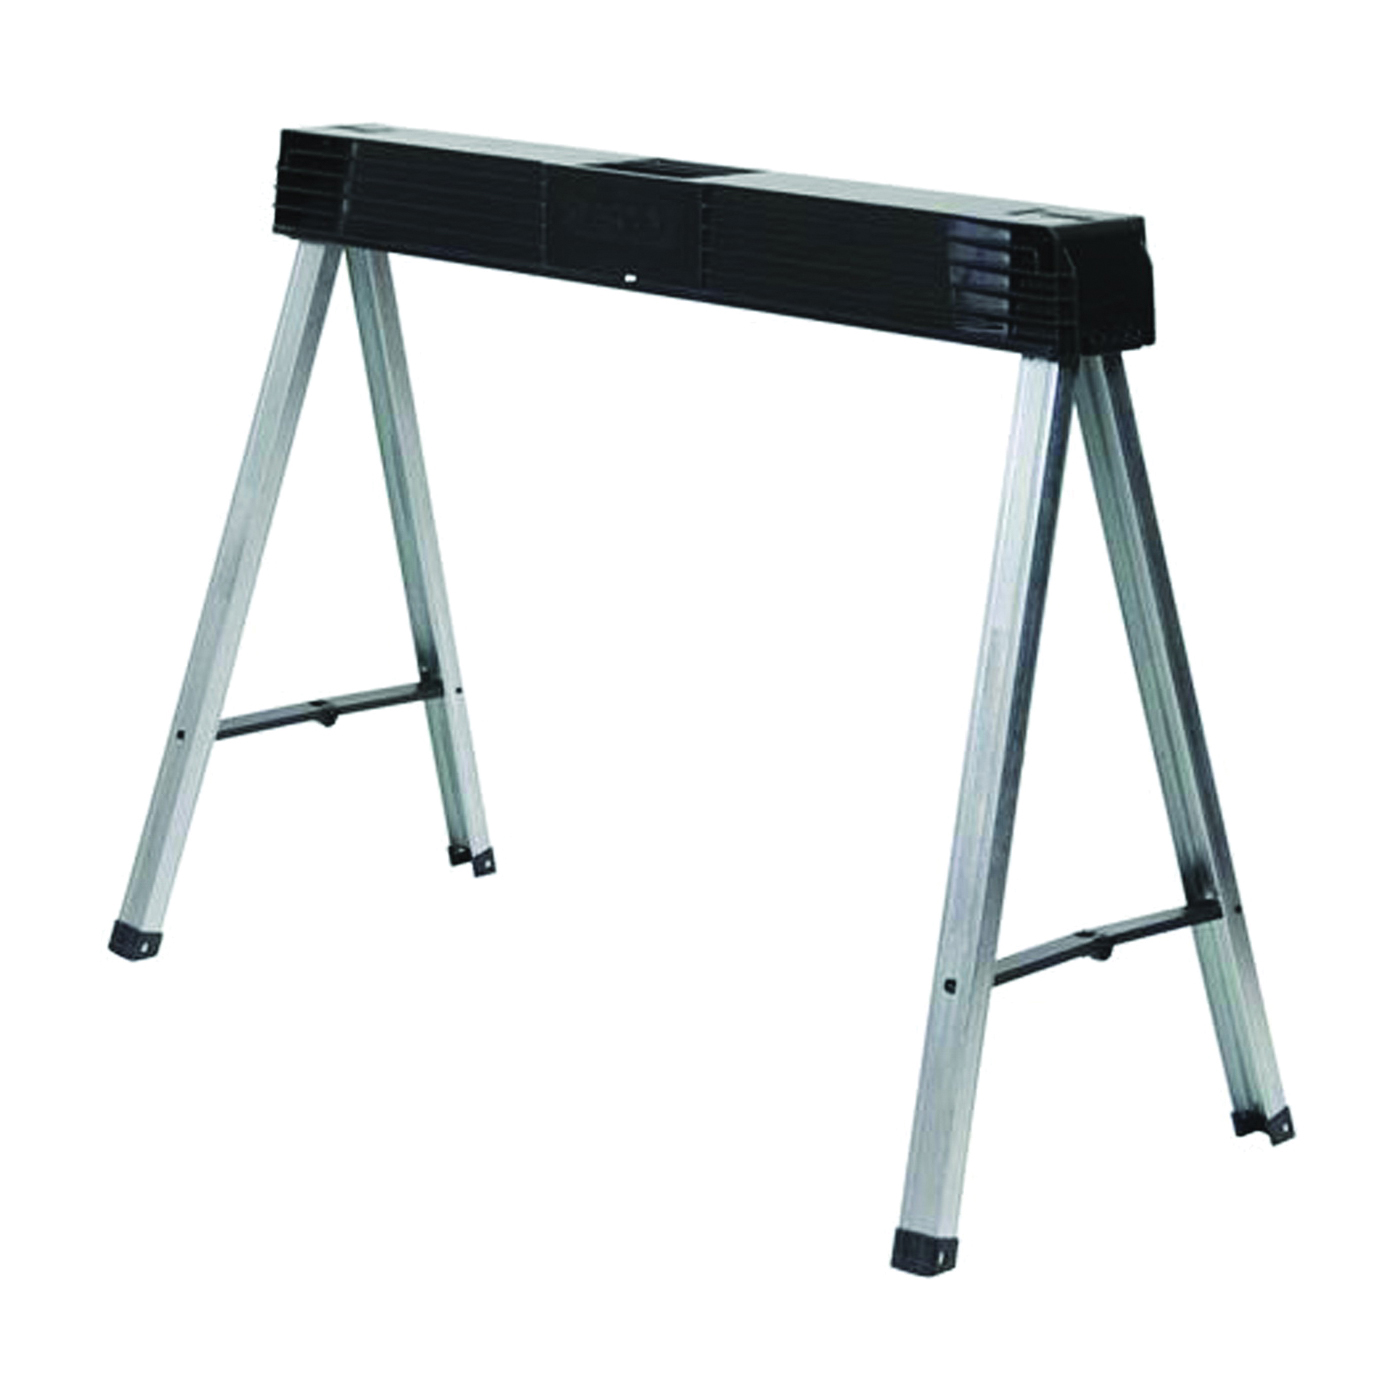 STST11151 Fold-Up Sawhorse, 800 lb, 4 in W, 5 in H, 40 in D, Metal/Polypropylene, Gray